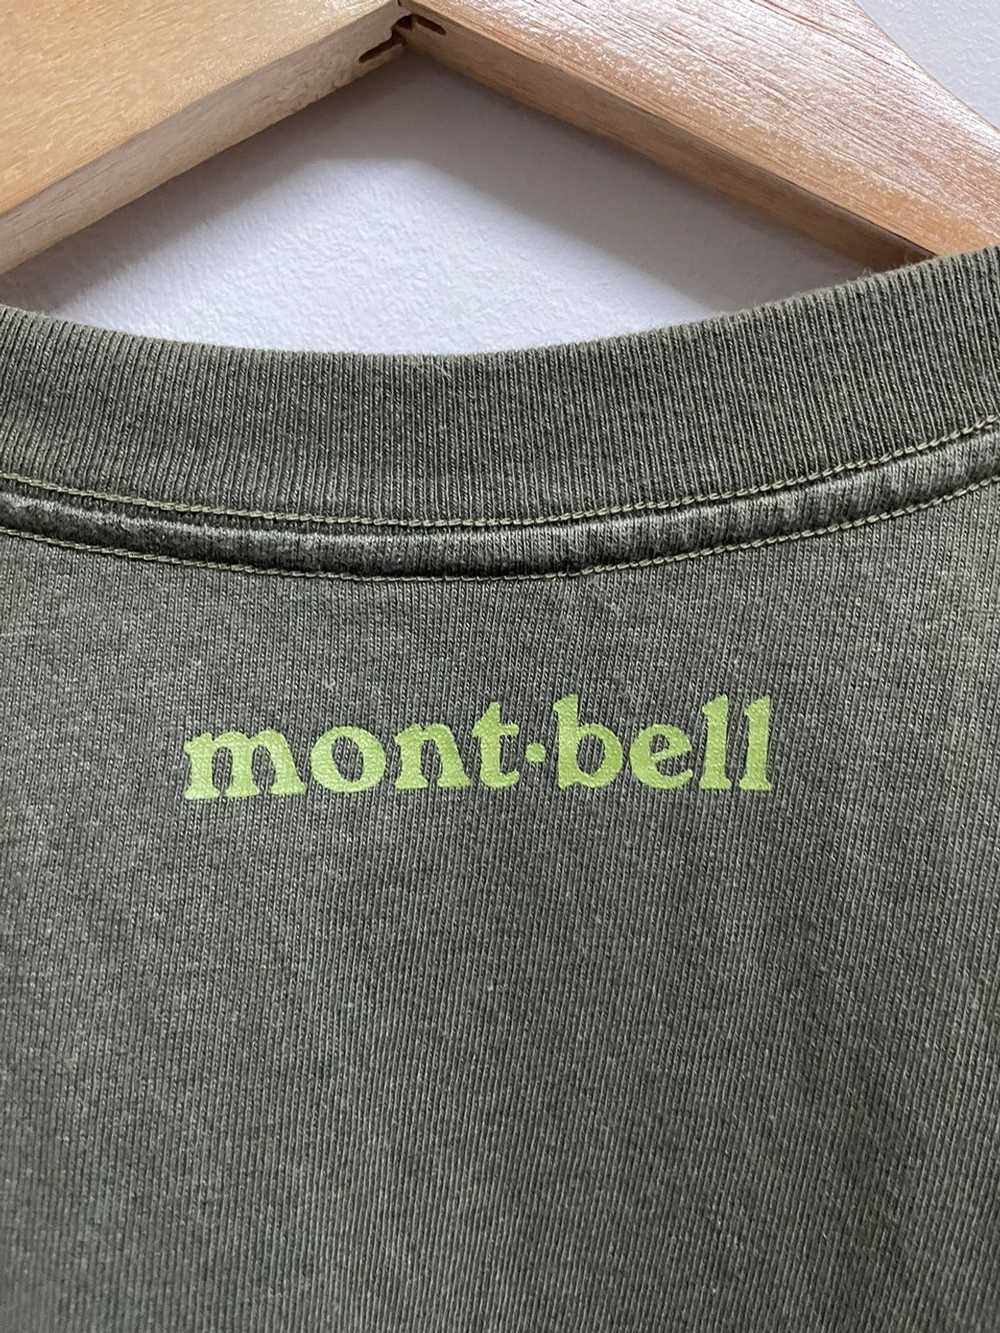 Montbell × Streetwear × Vintage MontBell T shirt - image 9